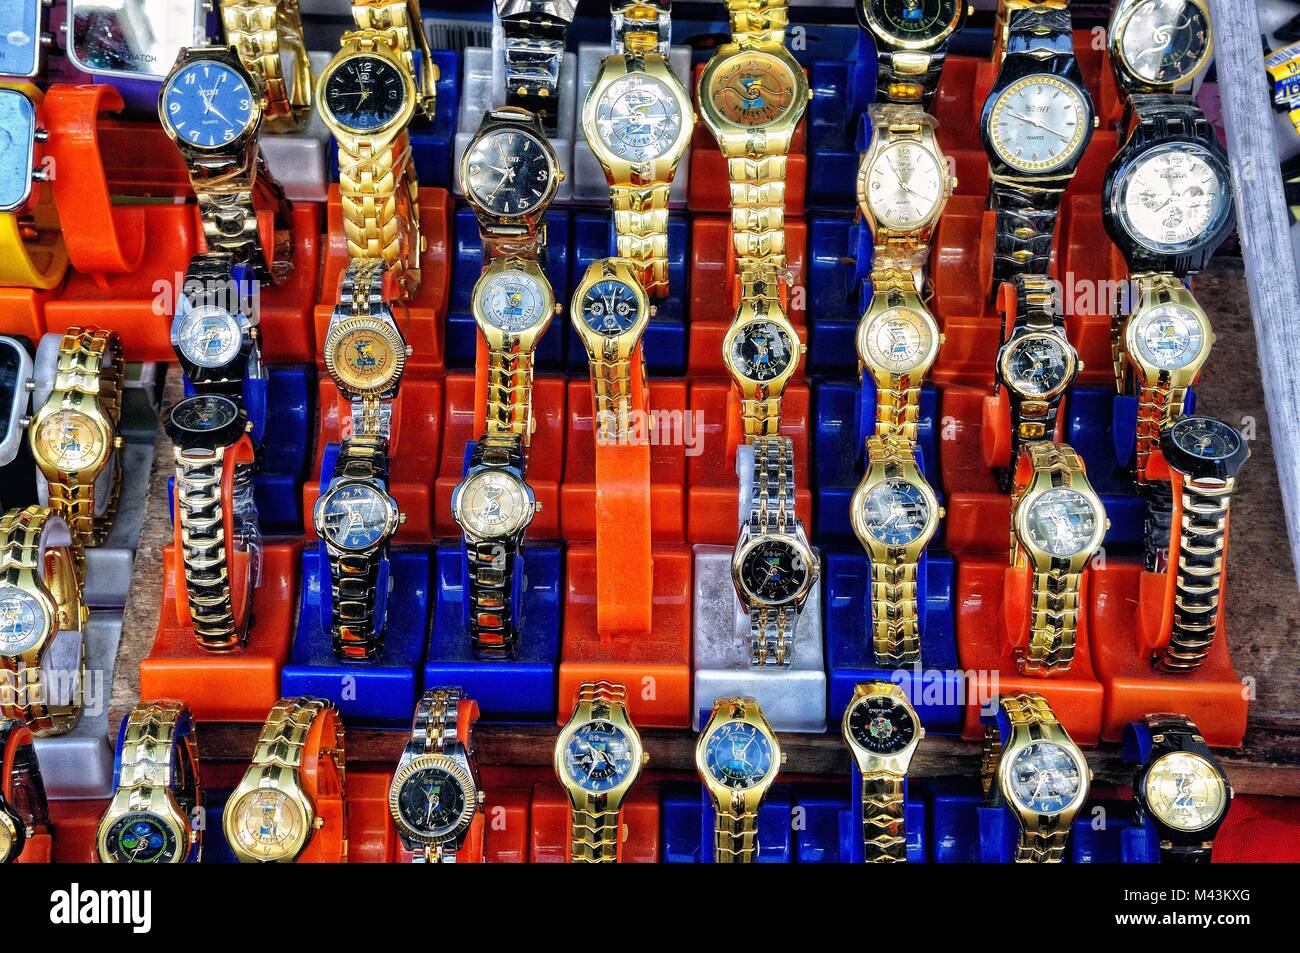 Rolex replicas account for half of fake watches, Watchfinder CEO says |  Business Post